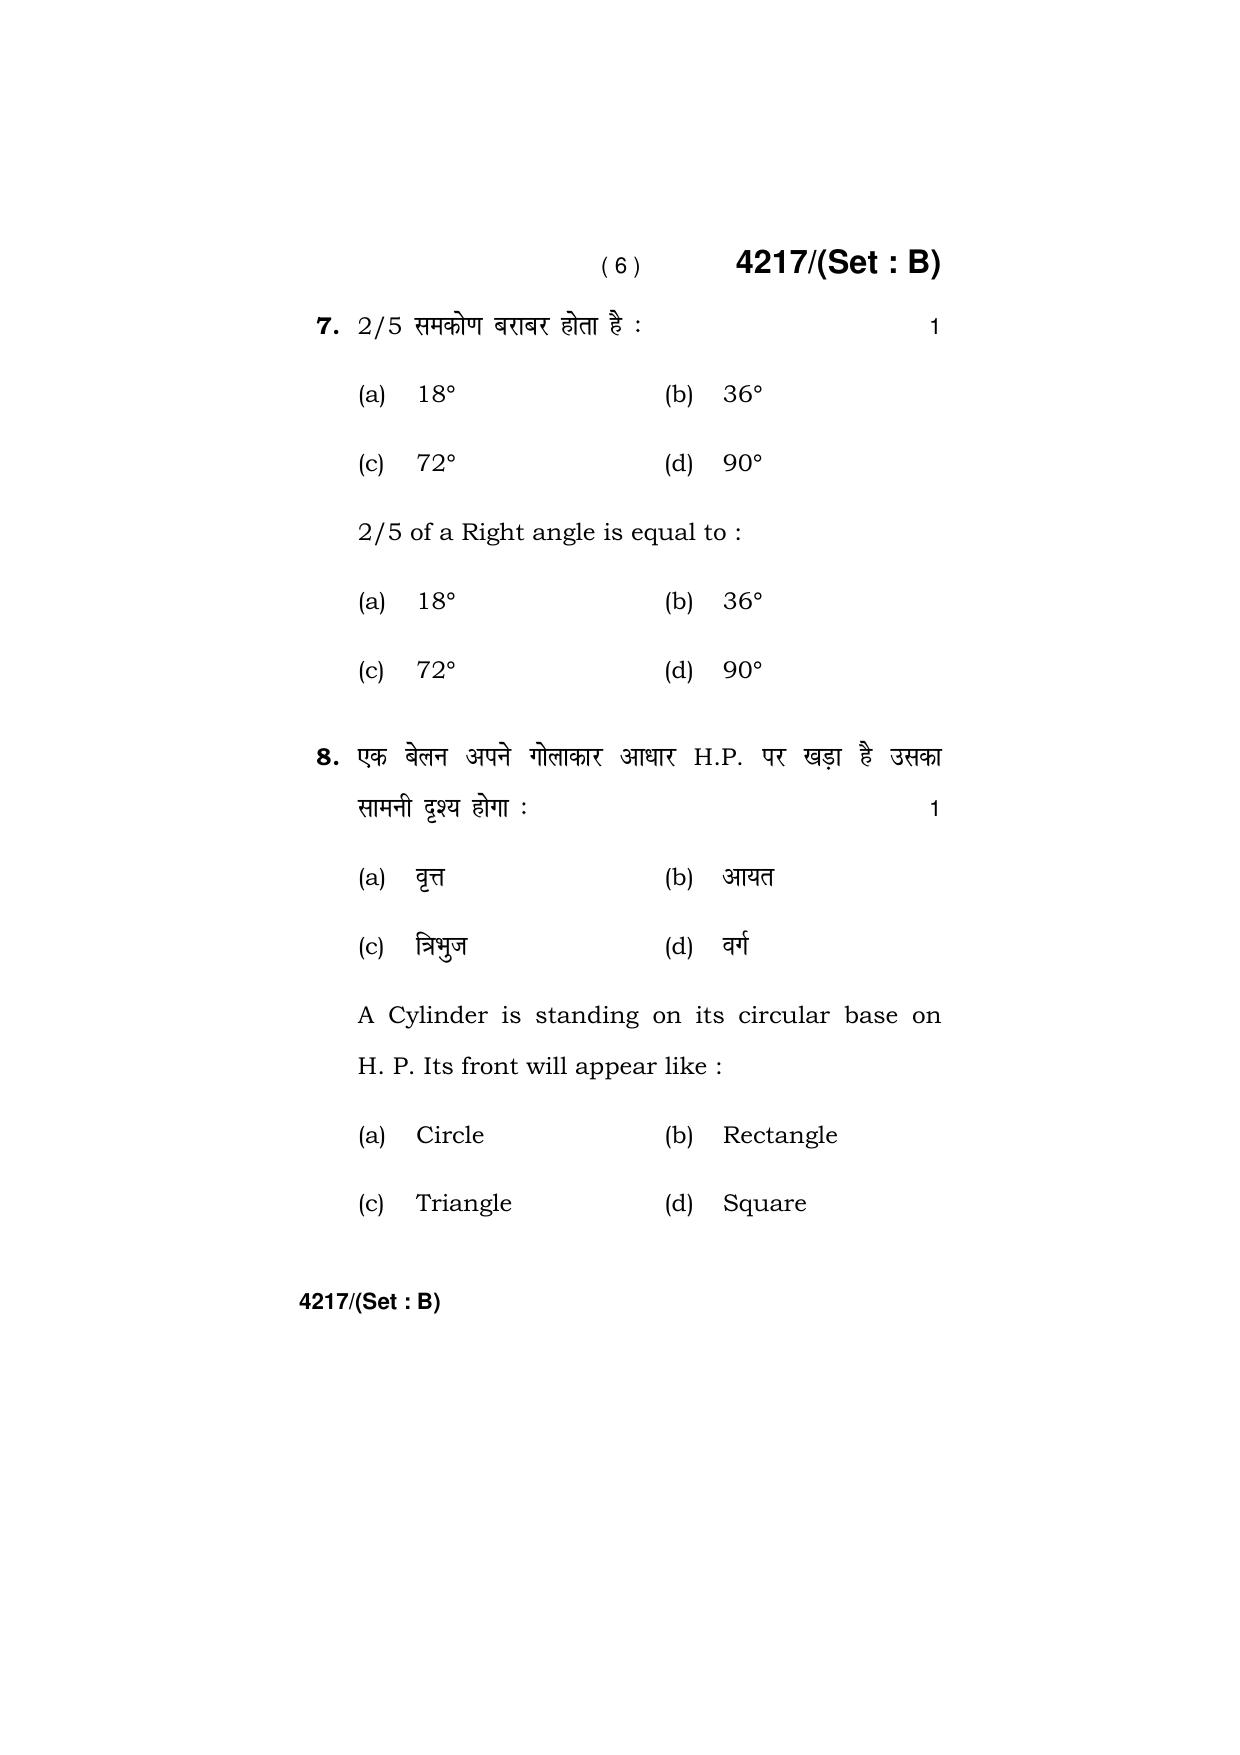 Haryana Board HBSE Class 10 Drawing (All Set) 2019 Question Paper - Page 14